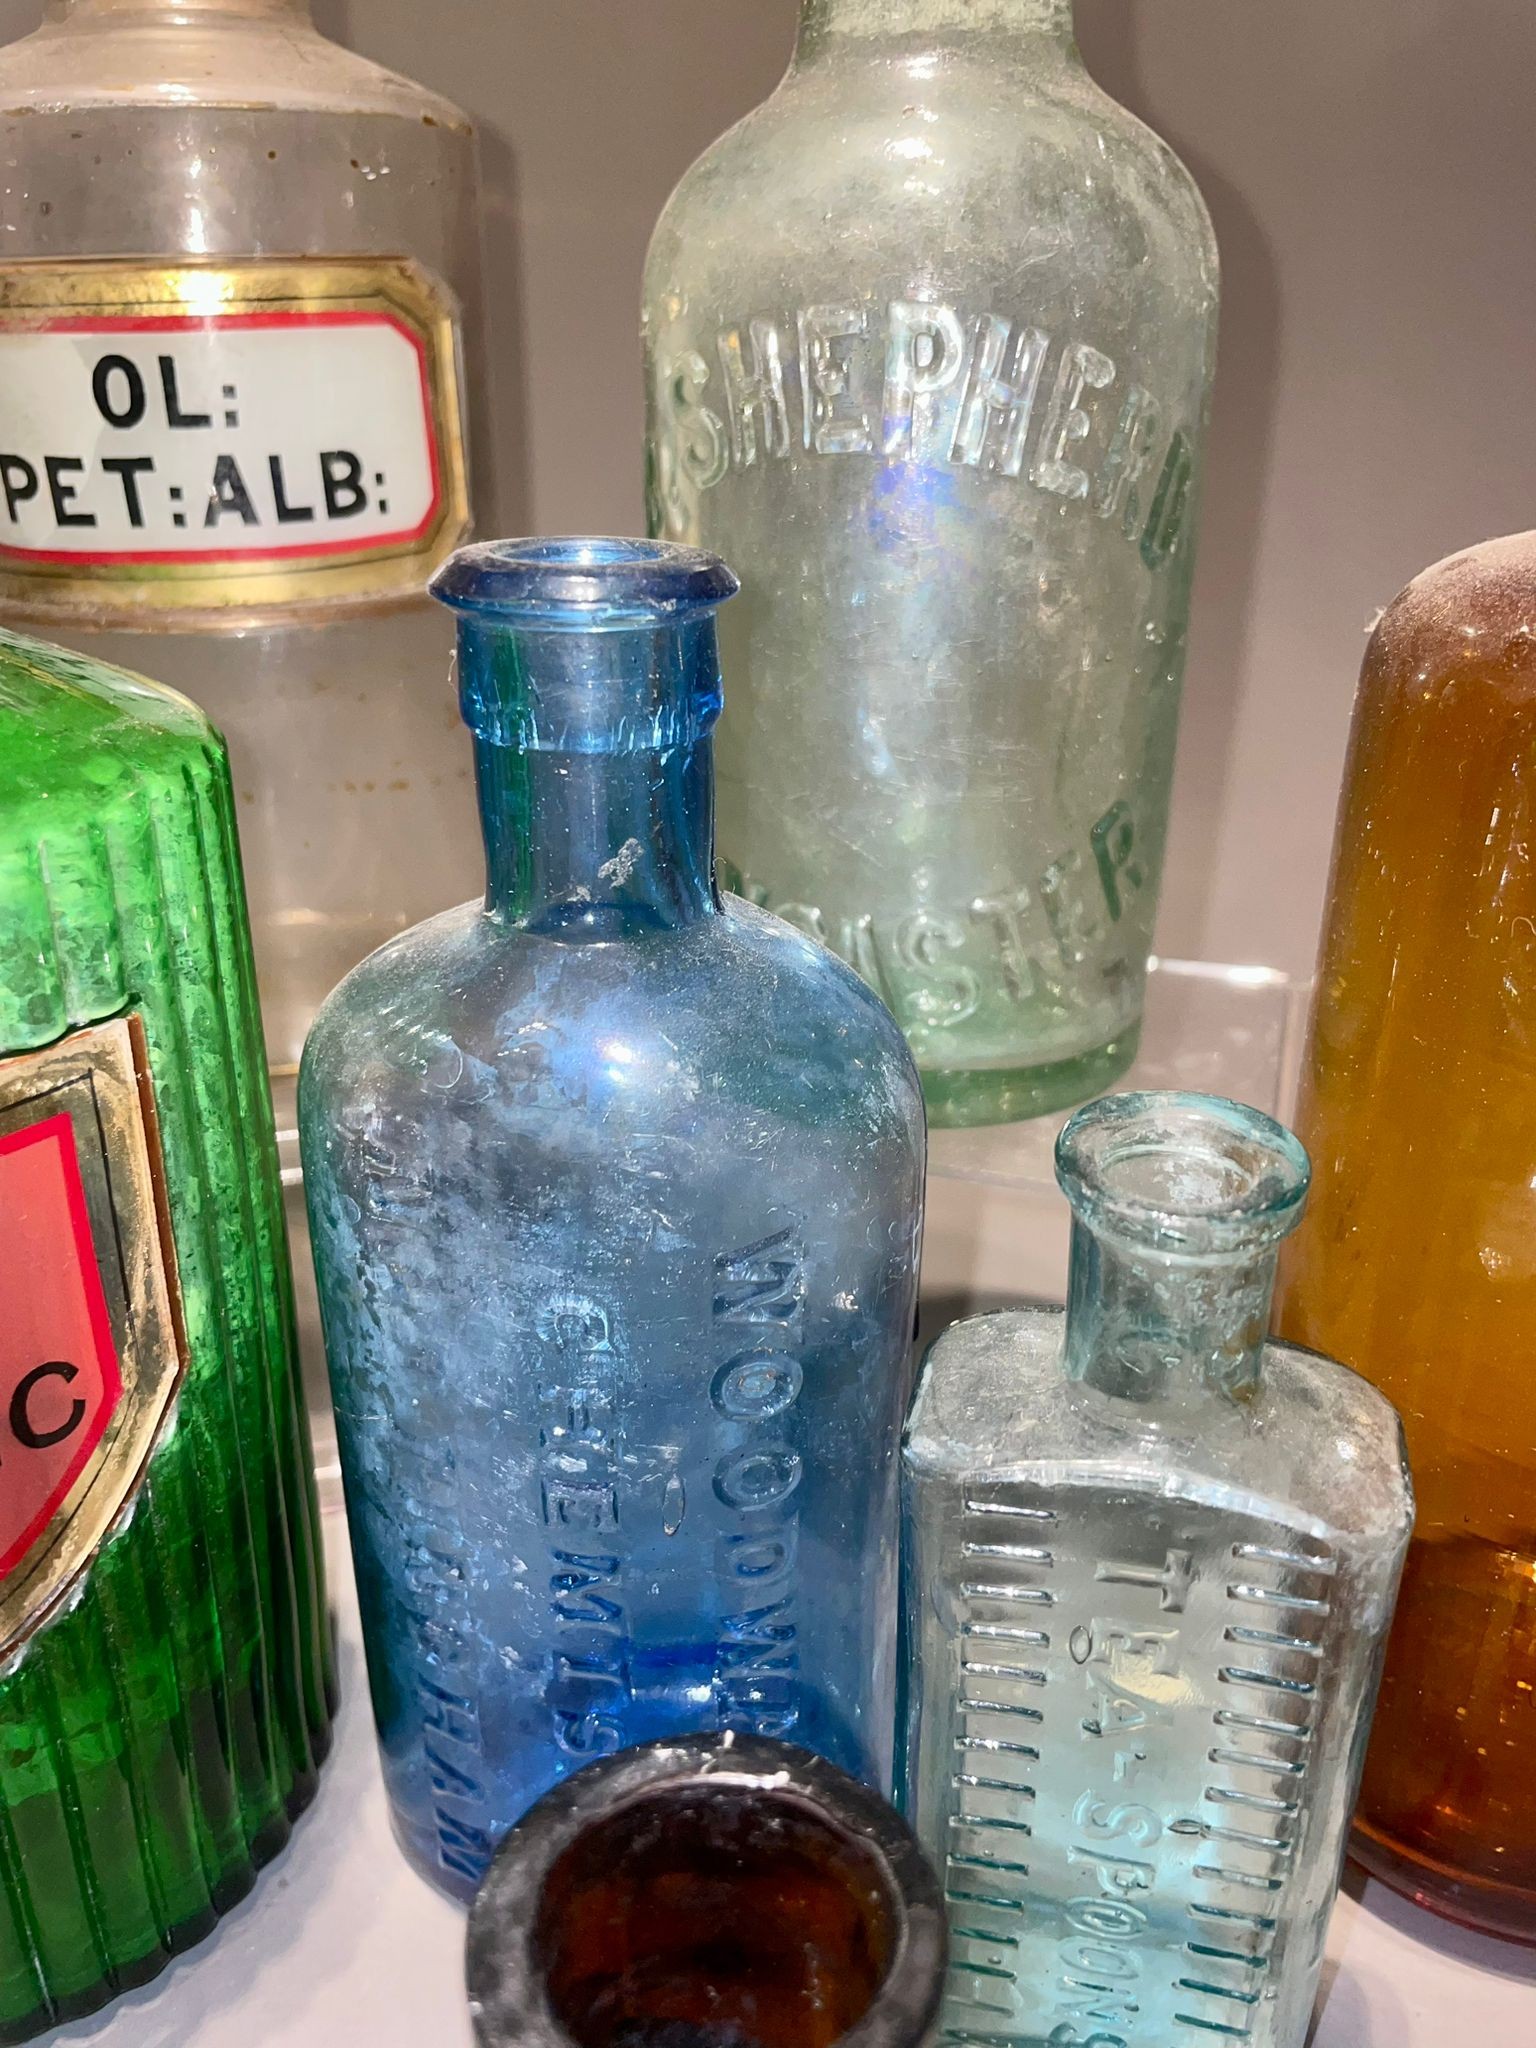 Glassware: early 20th Century bottles including Apothecary (Magnesia, OL:PET: ALB:, LIQ ARSENIC - Image 3 of 5